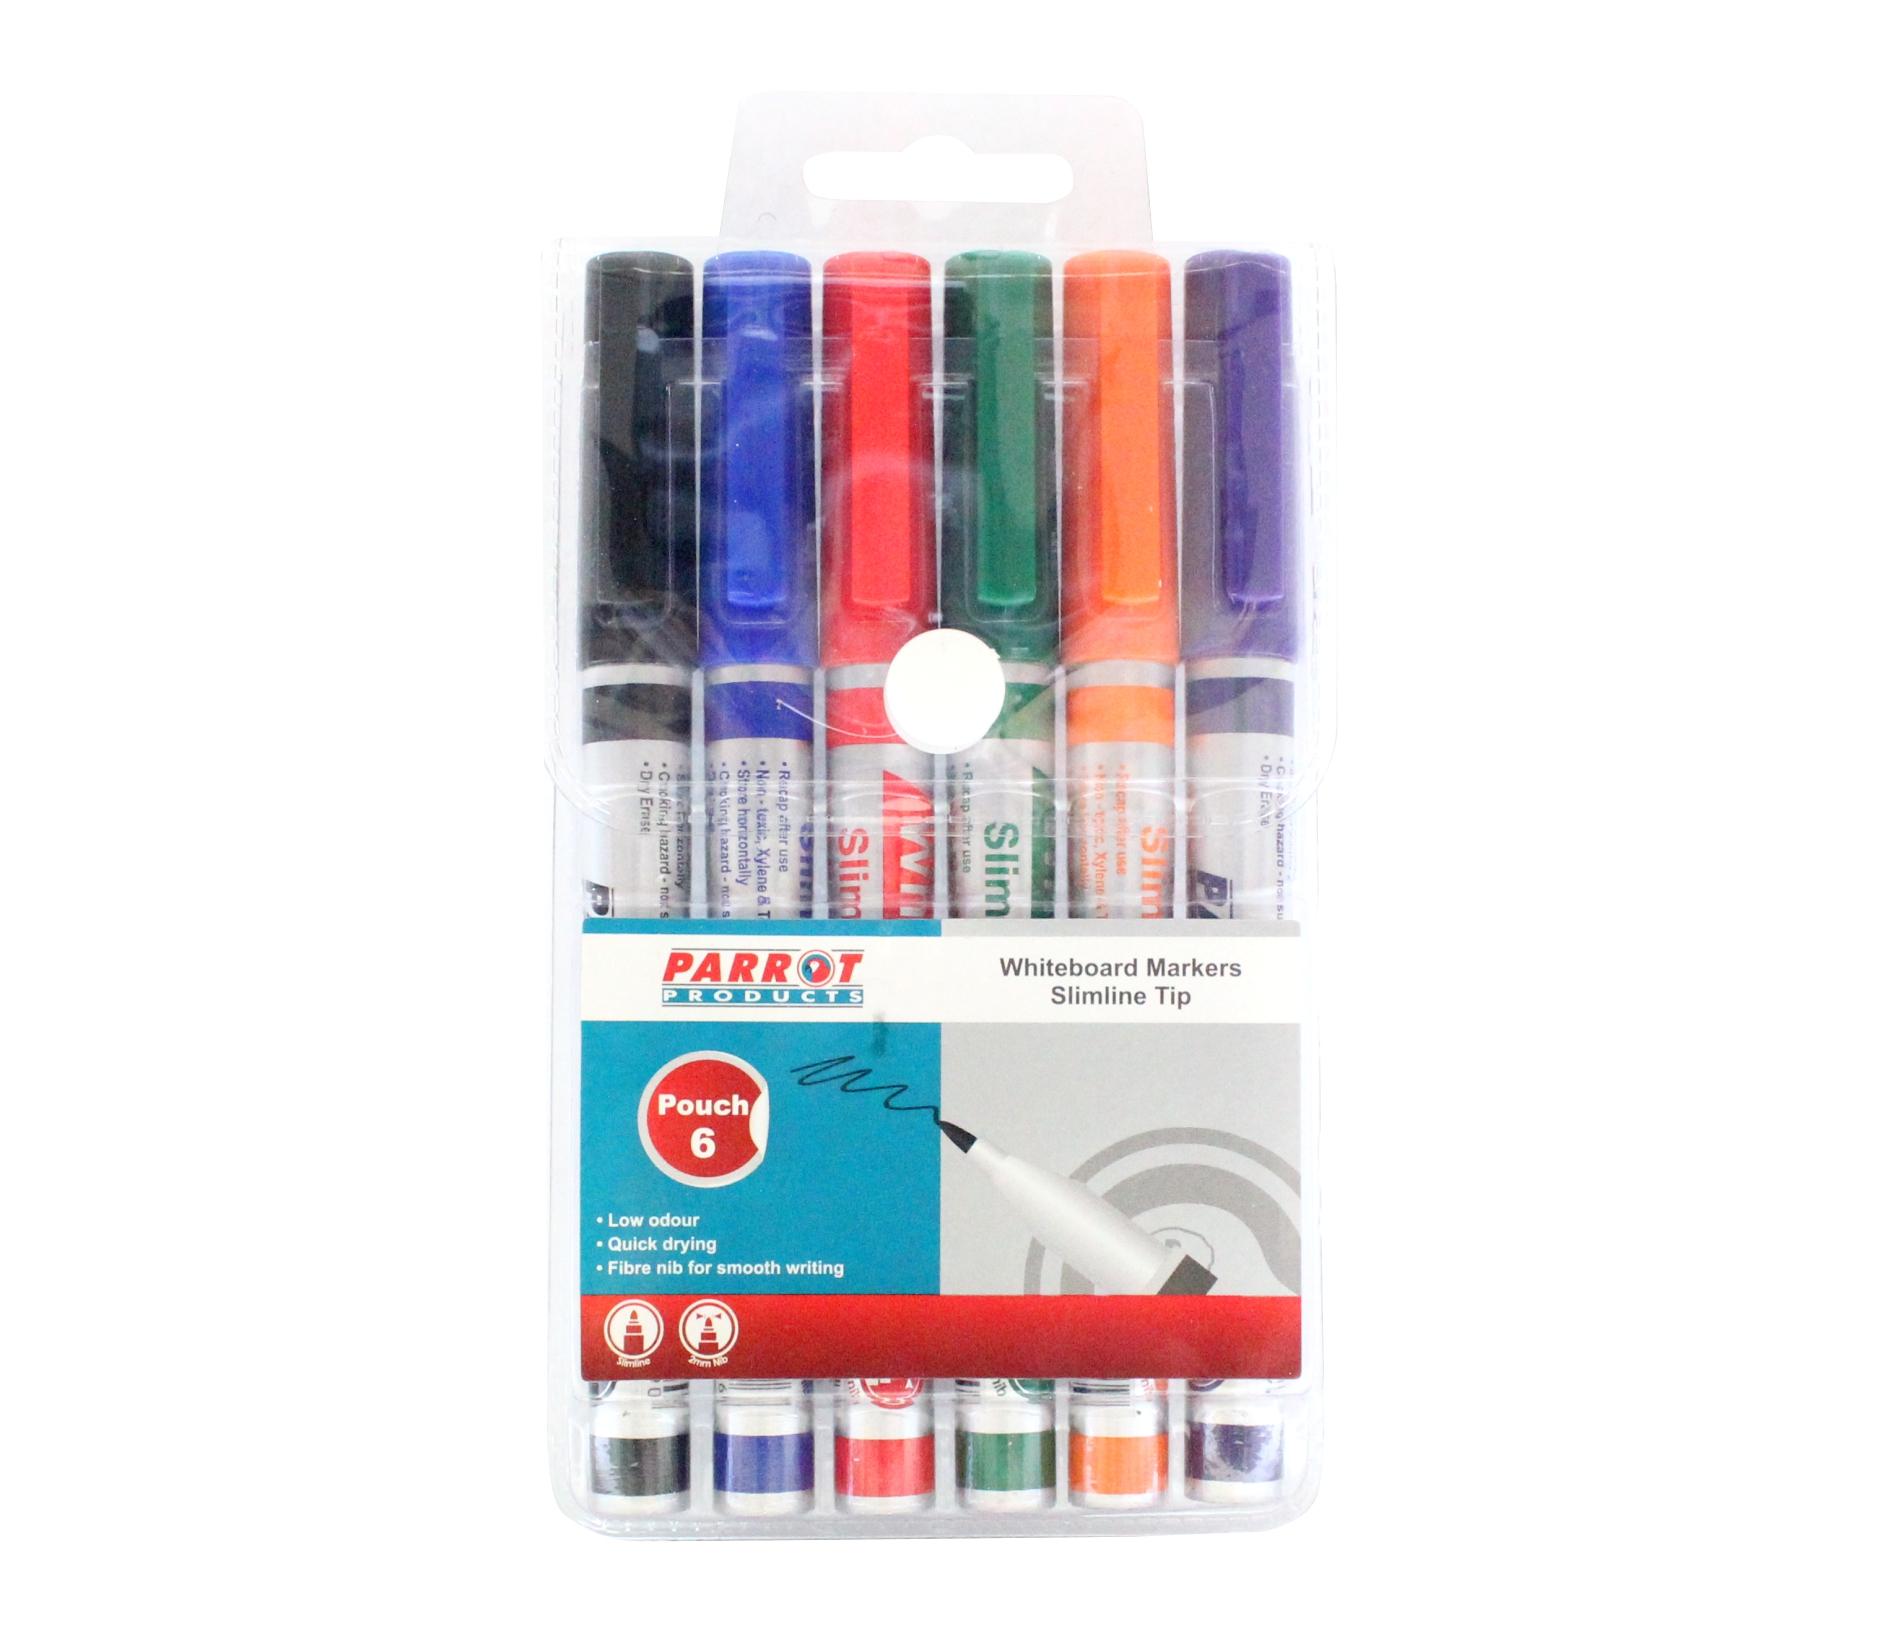 Whiteboard Markers (6 Markers - Slimline Tip - Pouch)